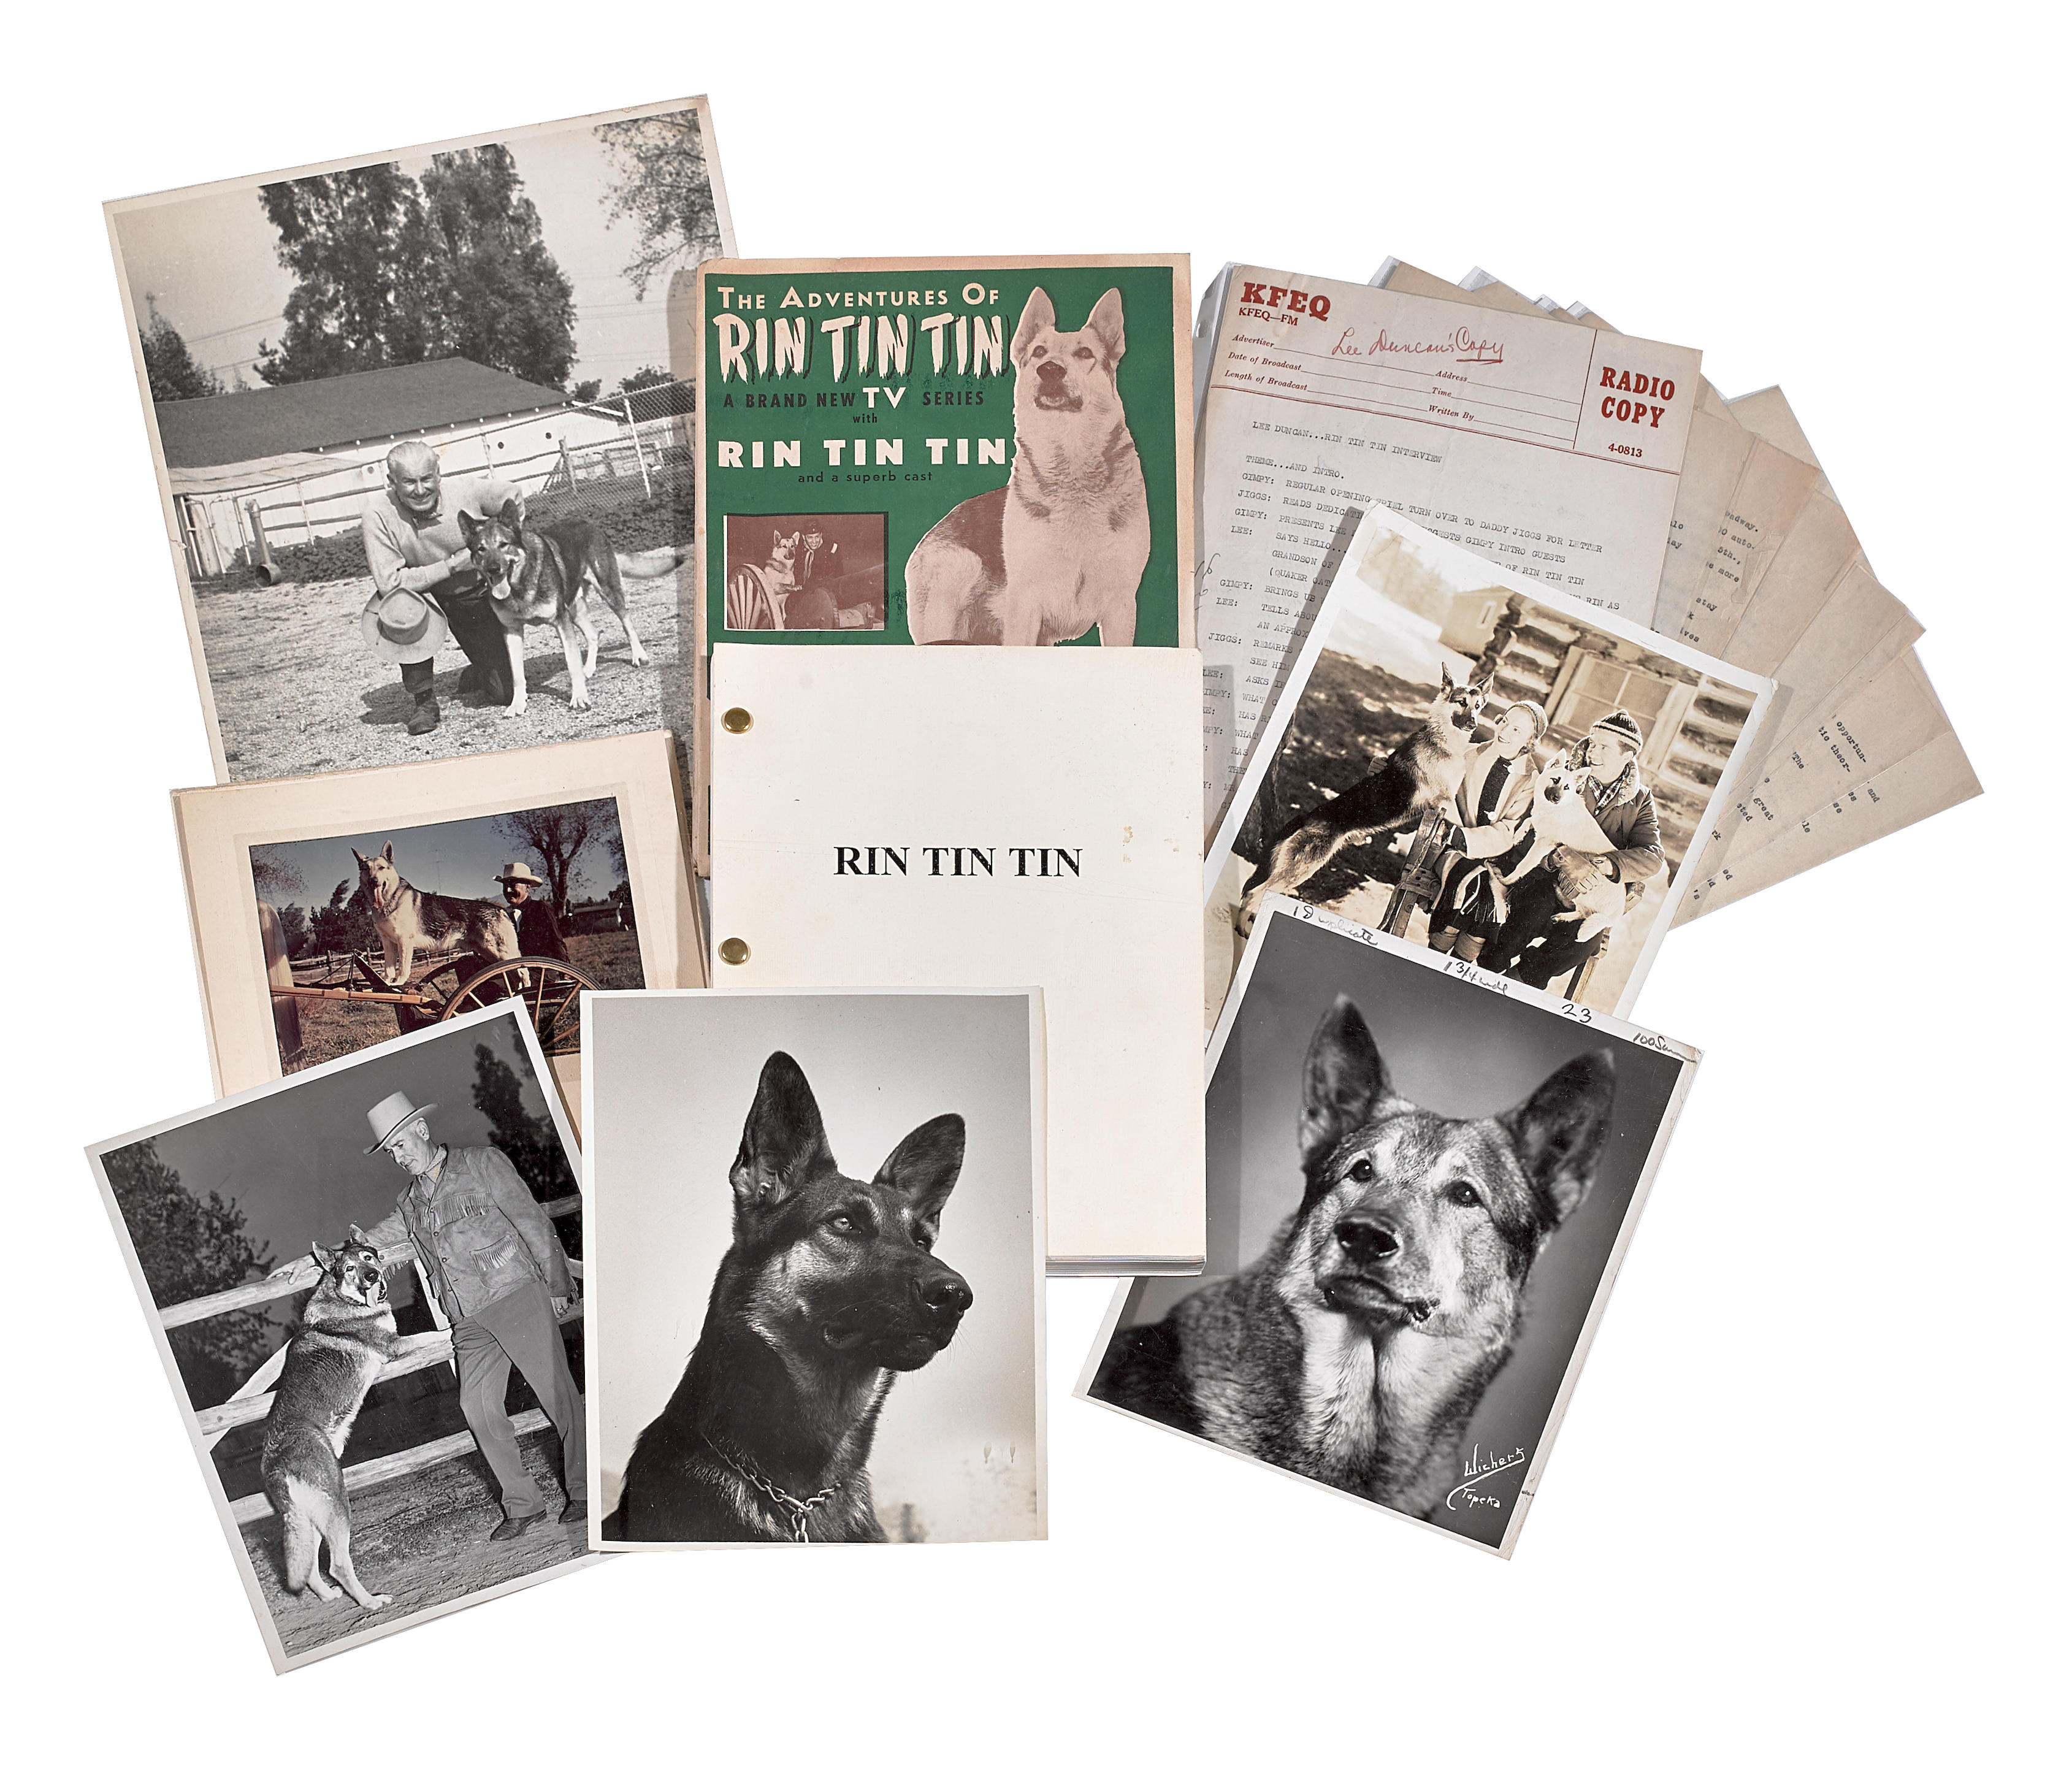 An archive pertaining to Rin Tin Tin and Lee Duncan